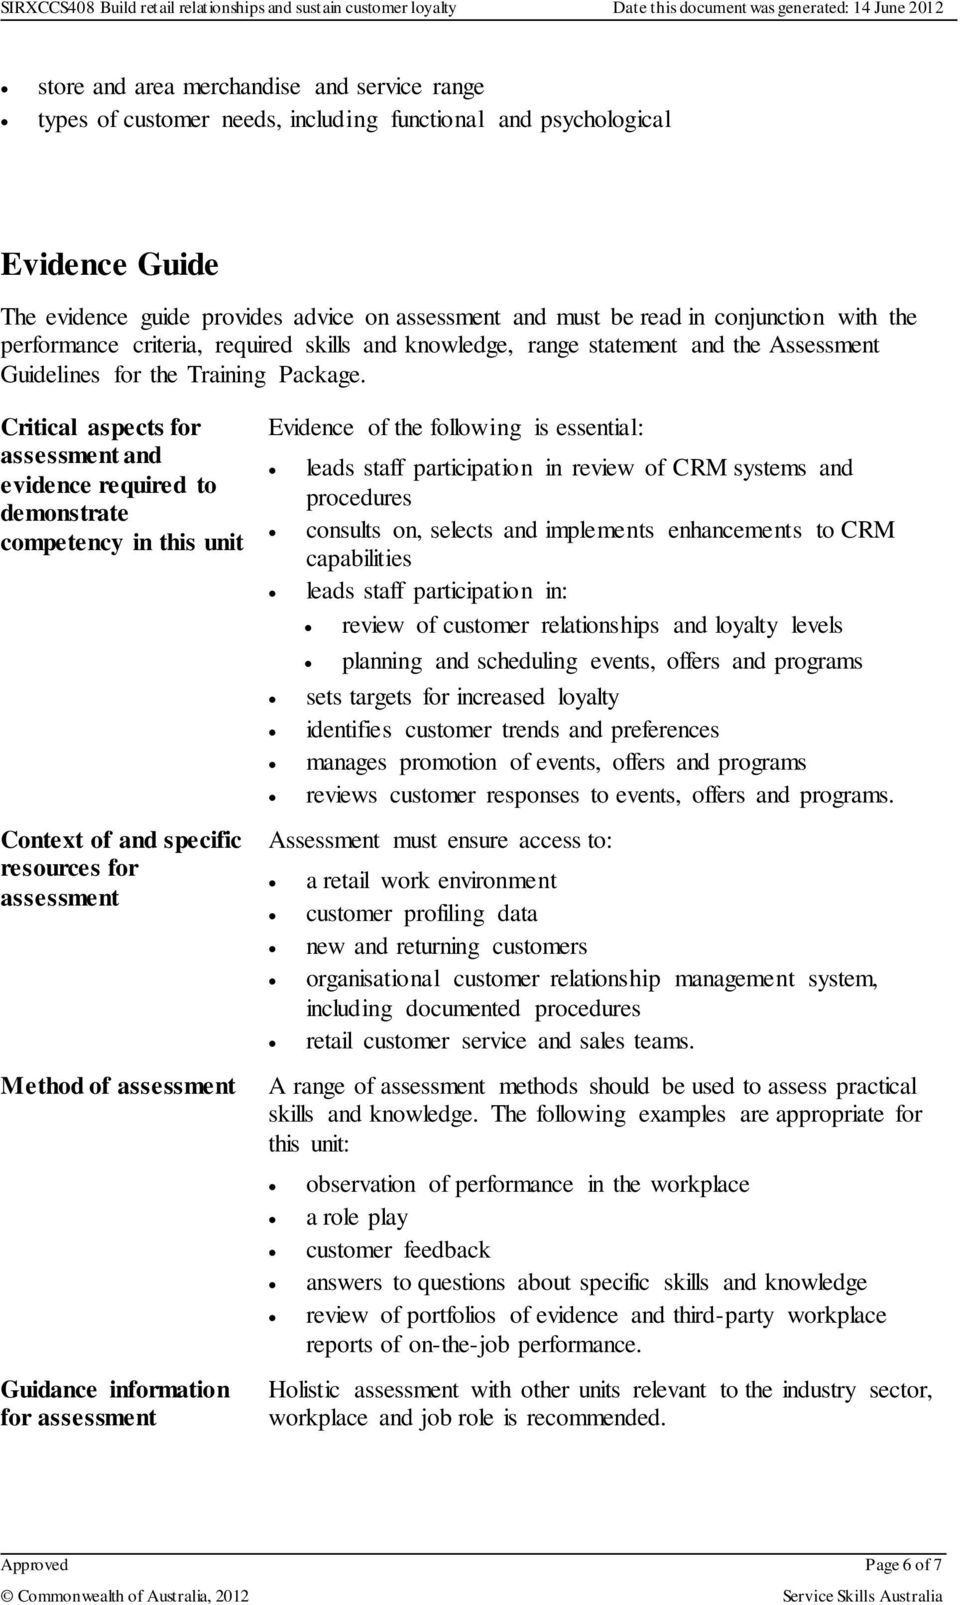 Critical aspects for assessment and evidence required to demonstrate competency in this unit Context of and specific resources for assessment Method of assessment Guidance information for assessment